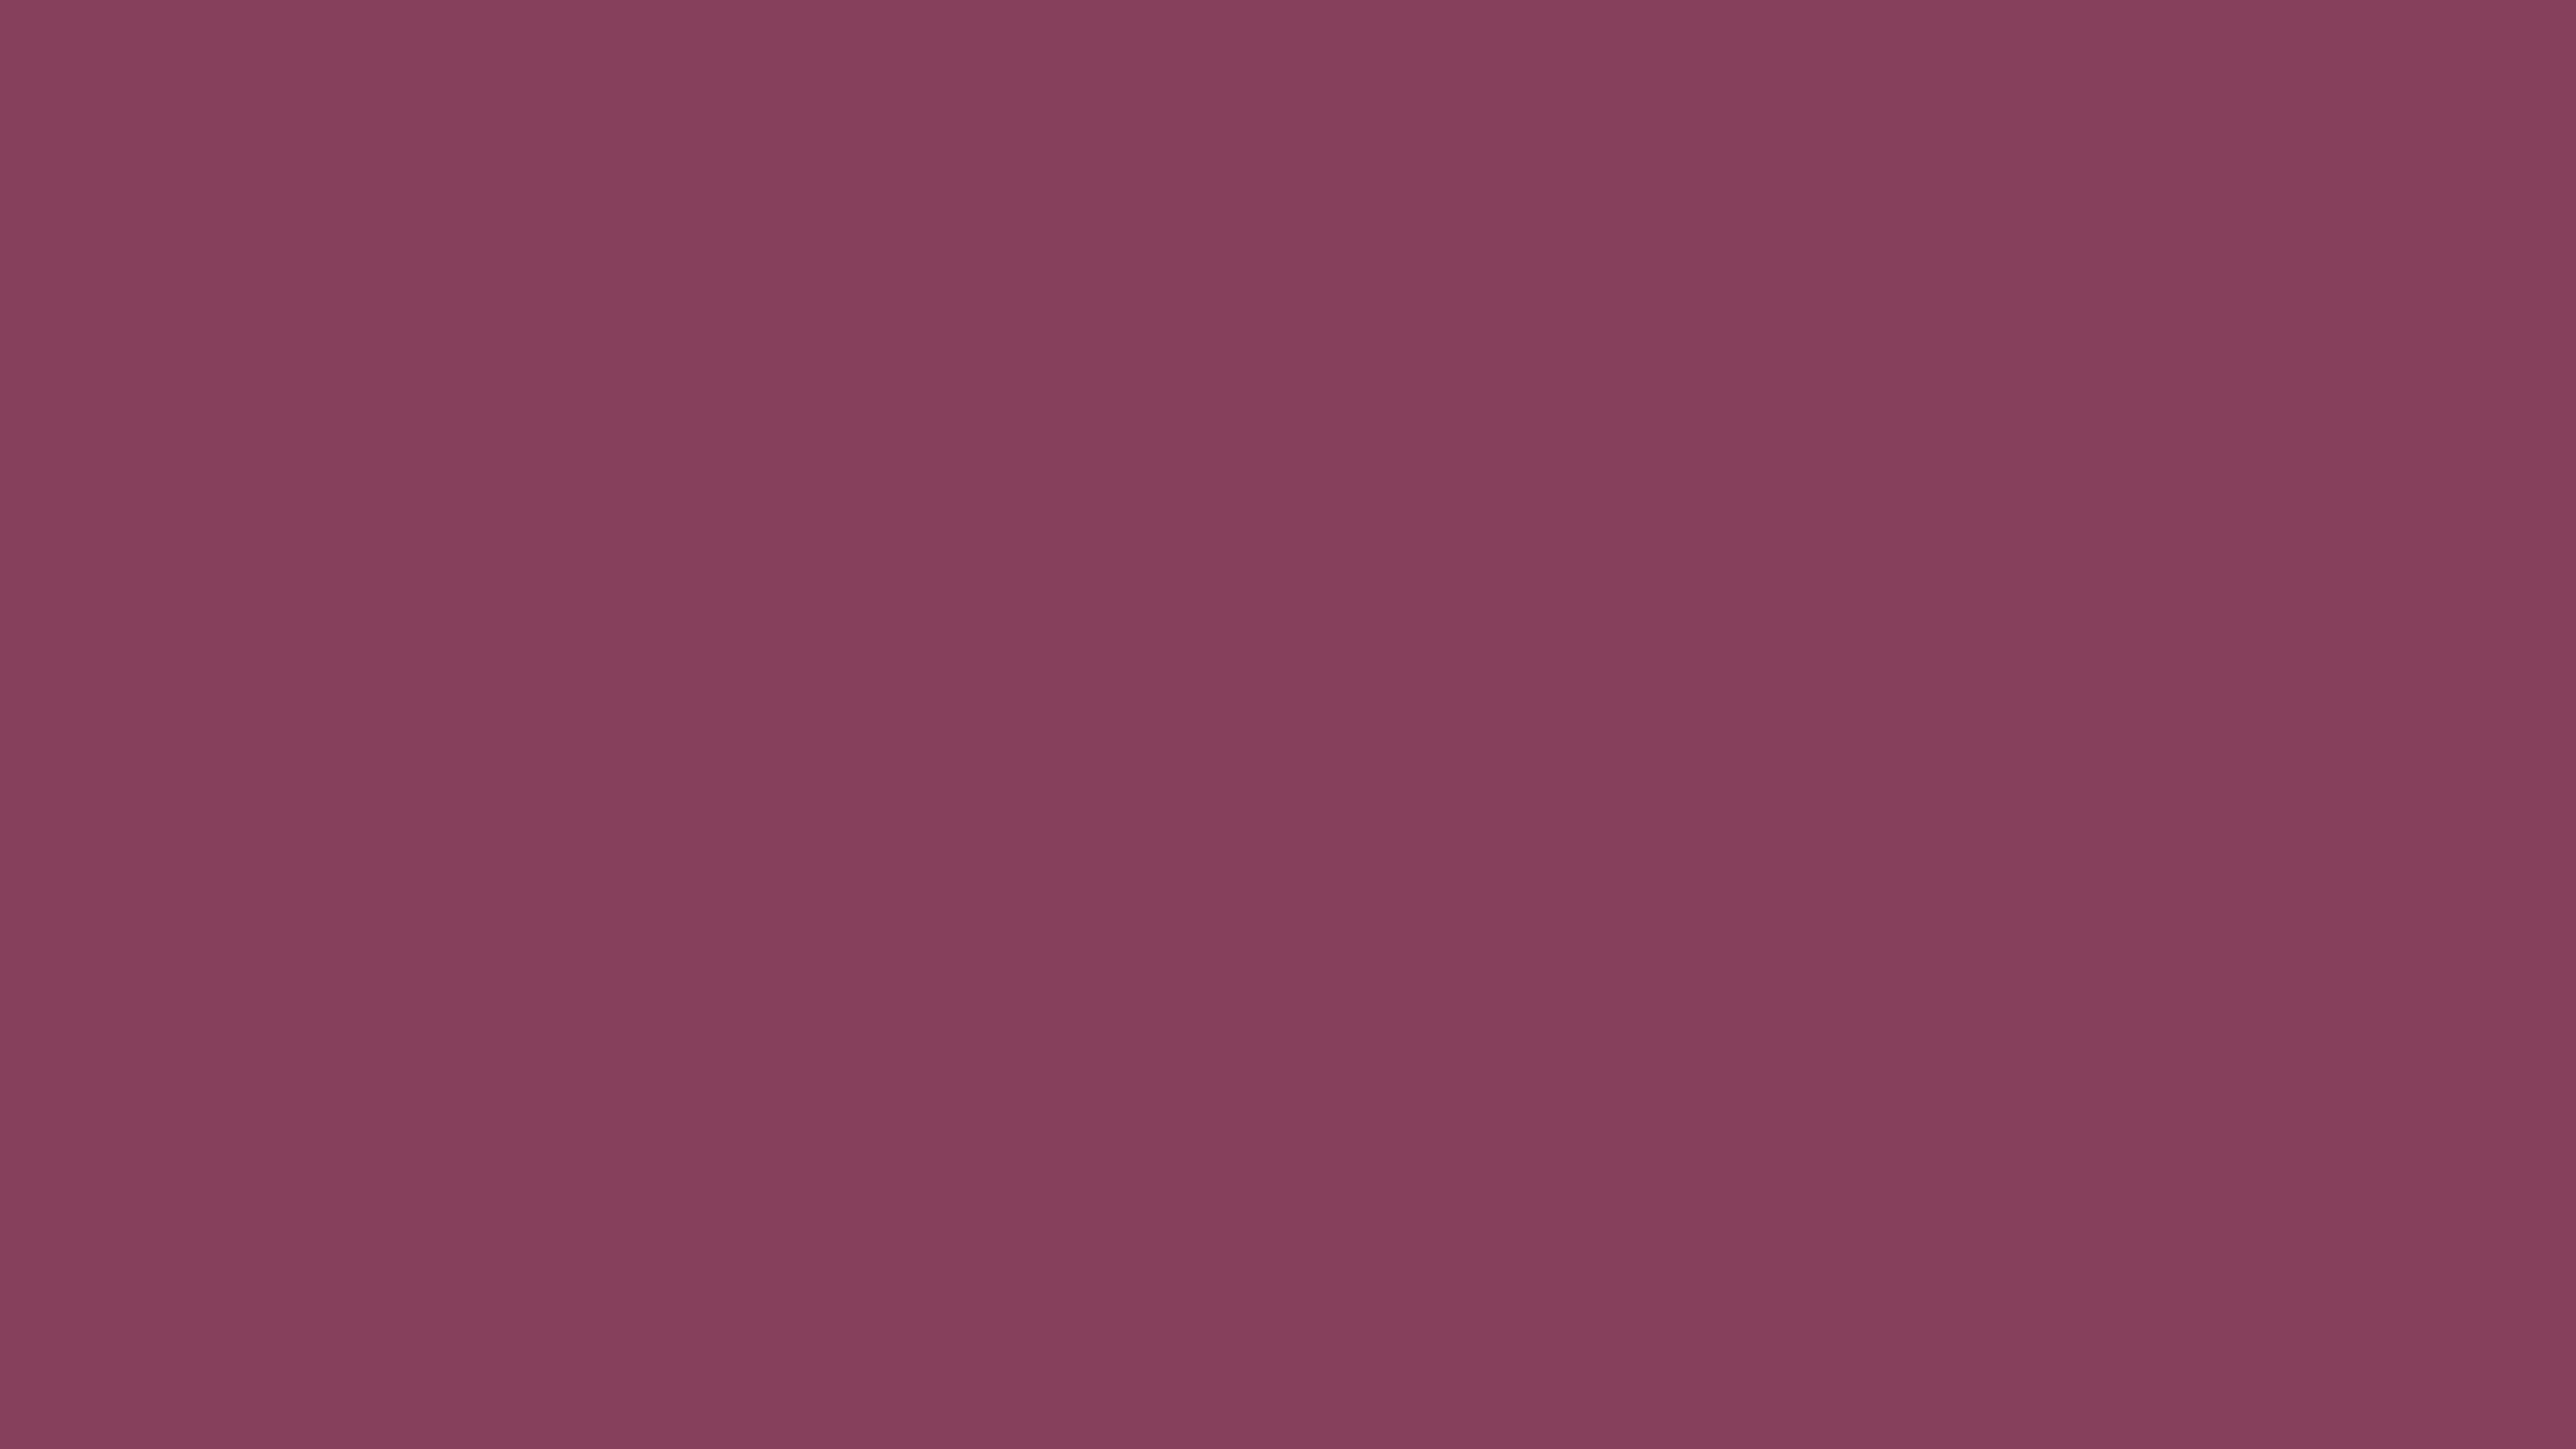 3840x2160 Deep Ruby Solid Color Background